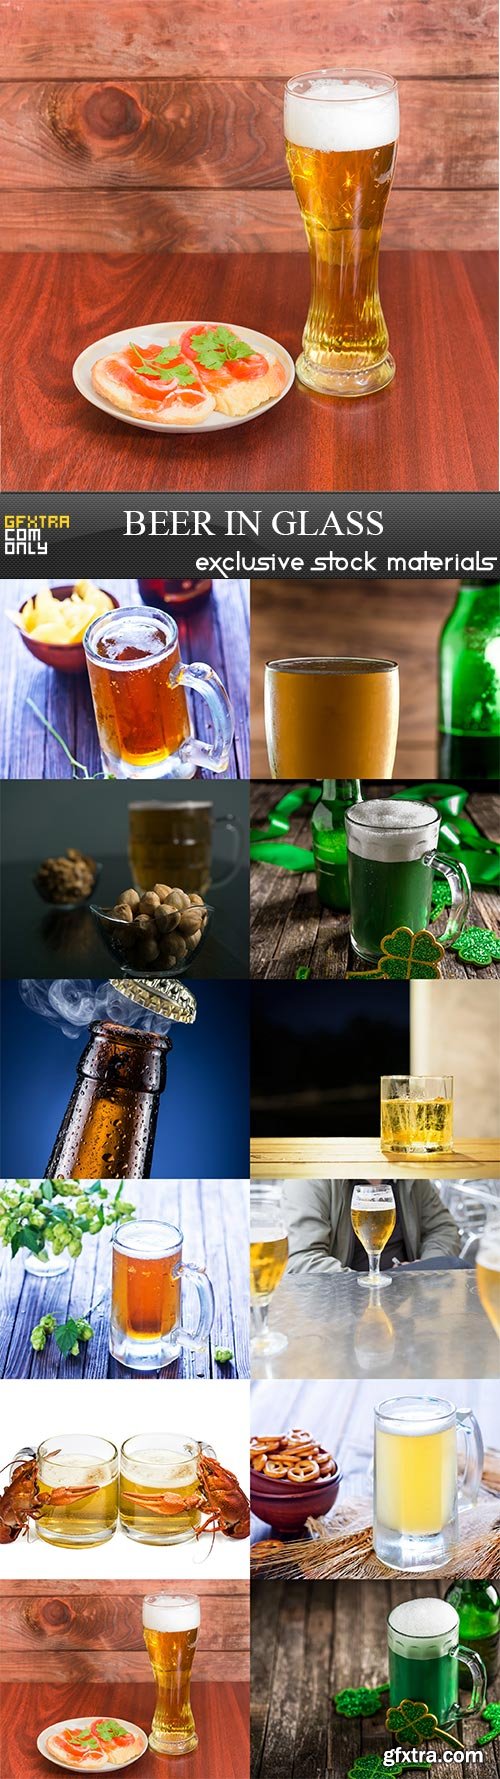 Beer in glass, 12 x UHQ JPEG